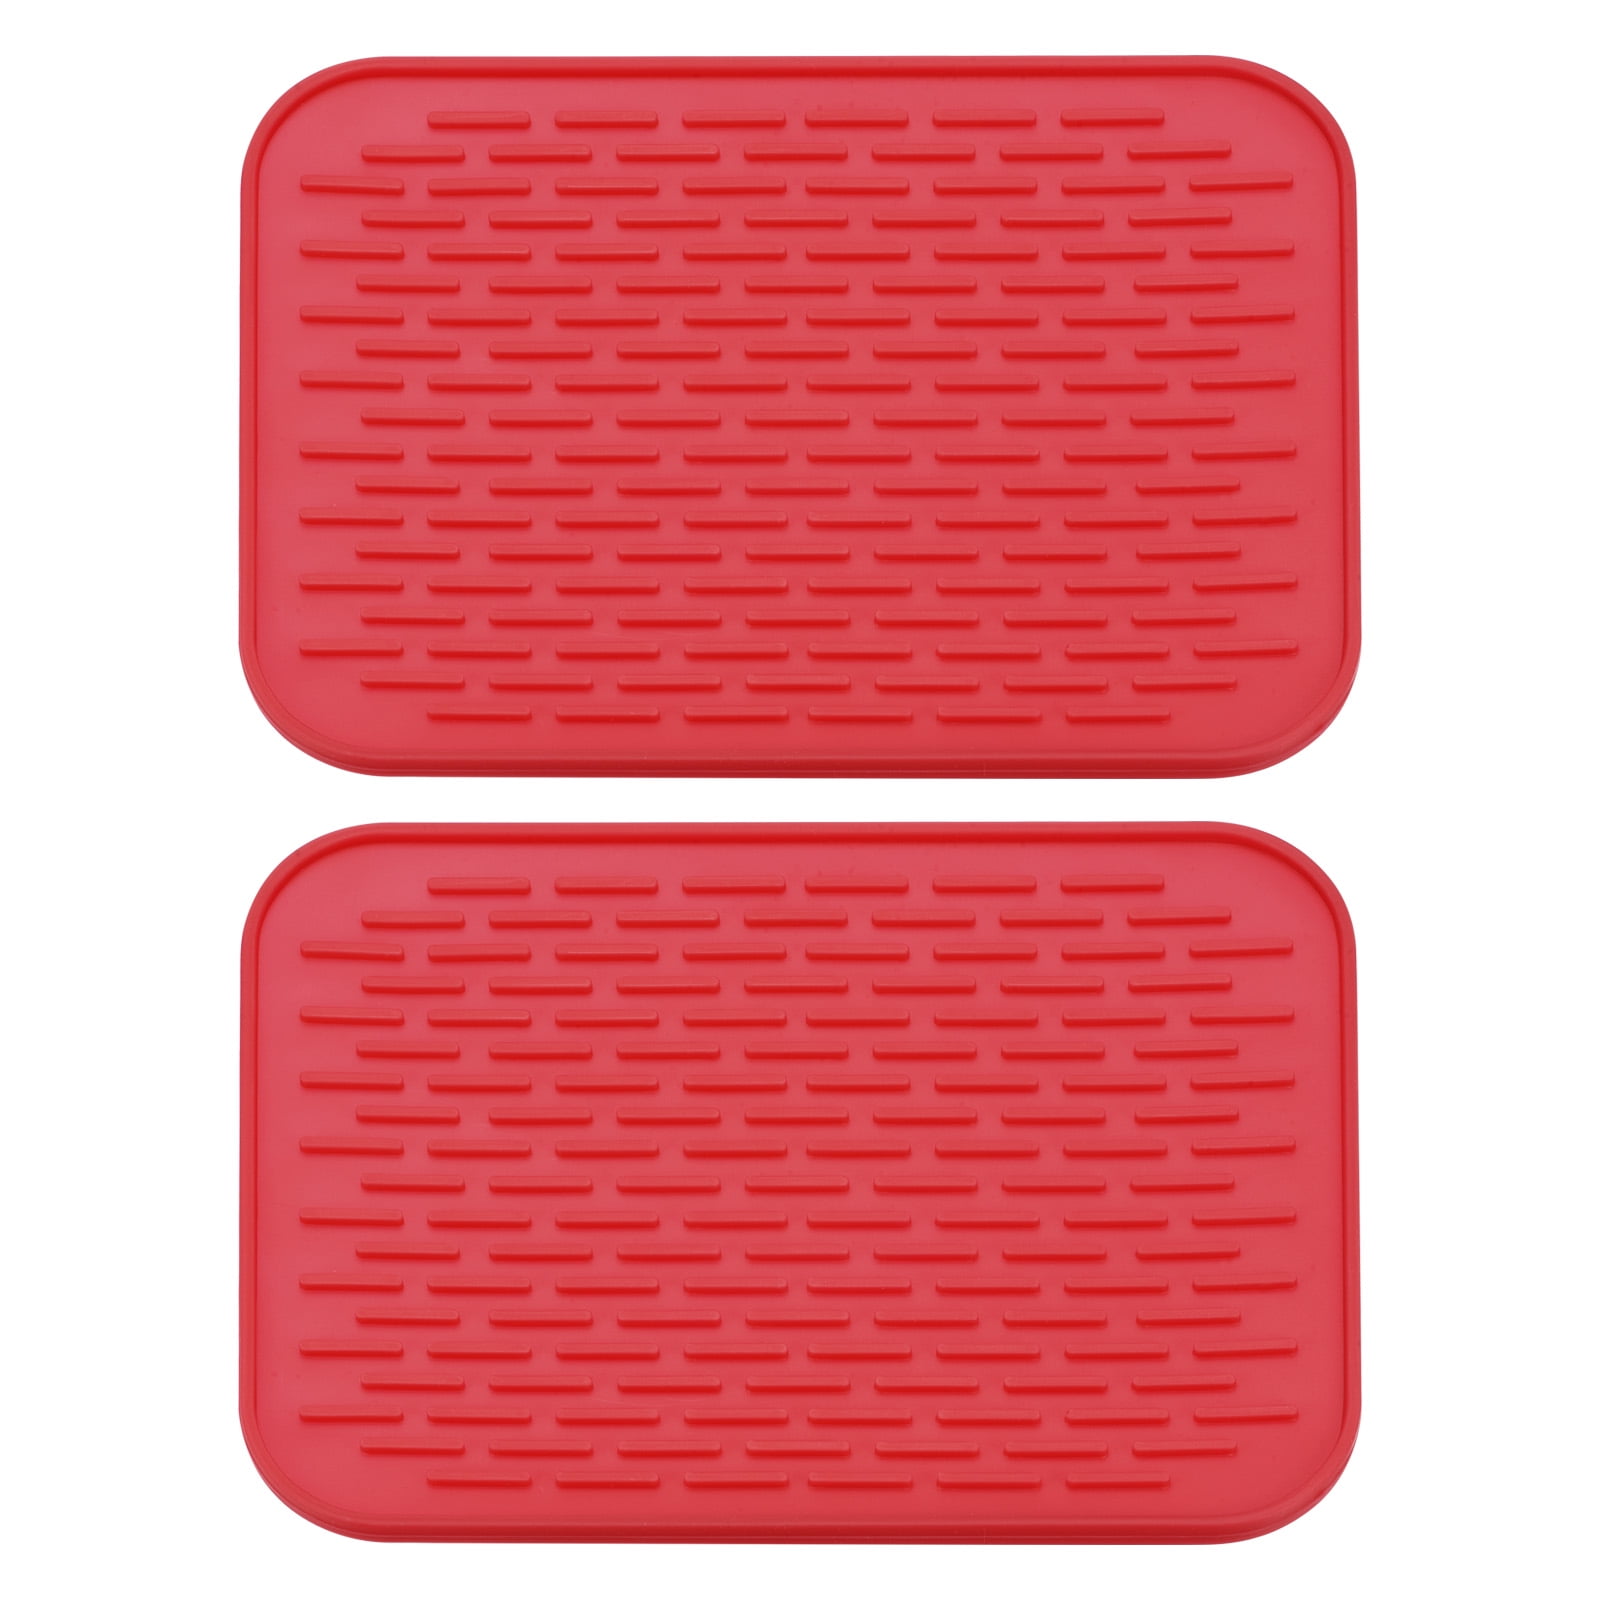 Silicon Dish Drying Mats Kitchen  Dish Drainer Silicone Drying -  Waterproof Pad - Aliexpress